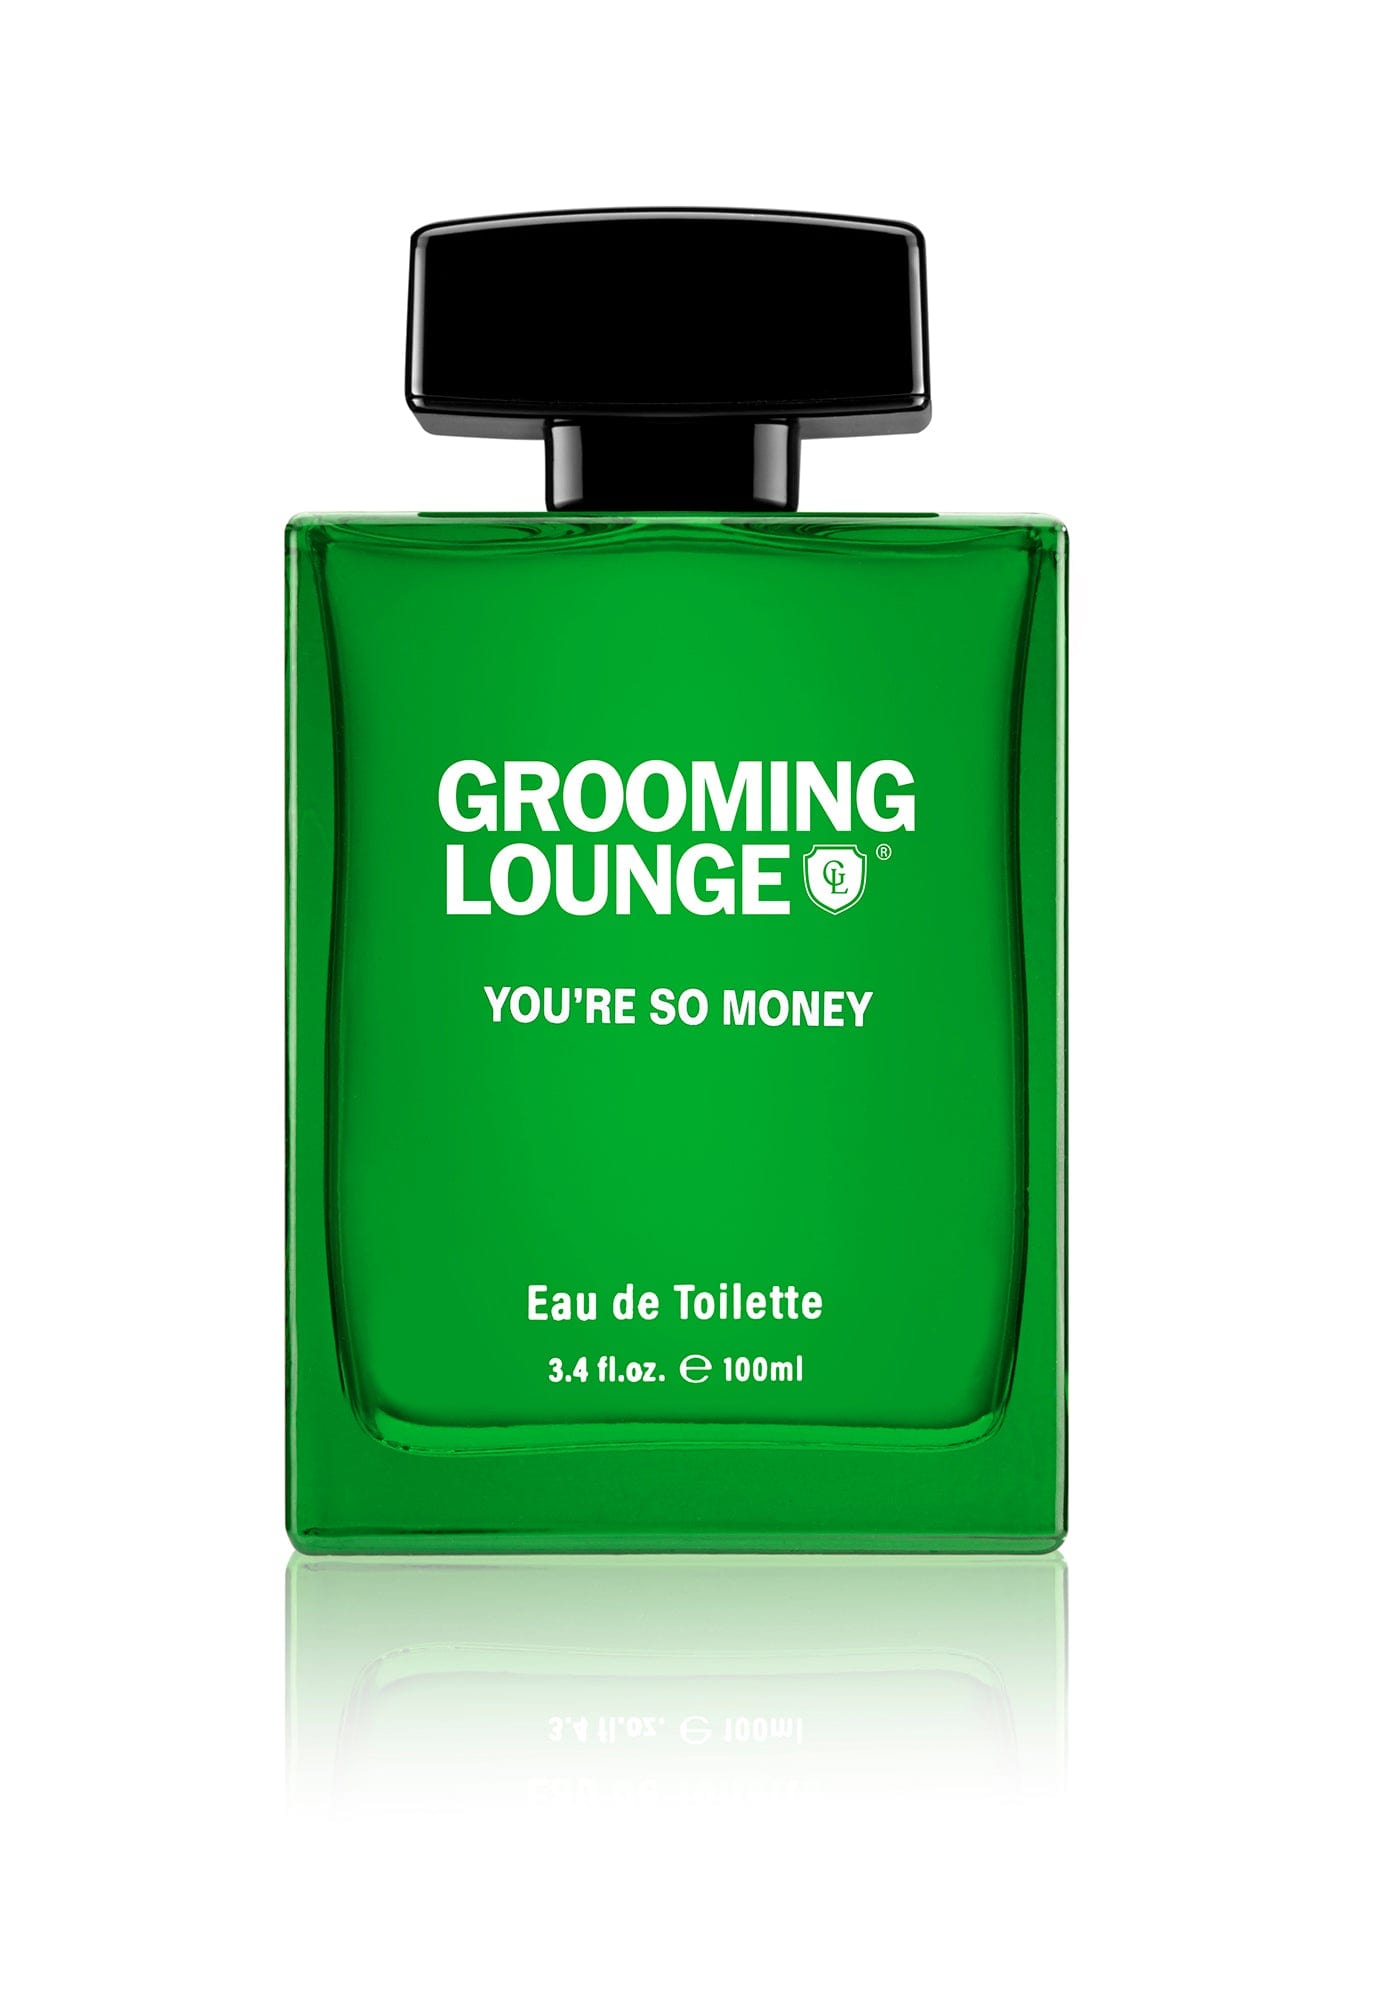 3.4 oz bottle of grooming's lounge's you're so money in EDT